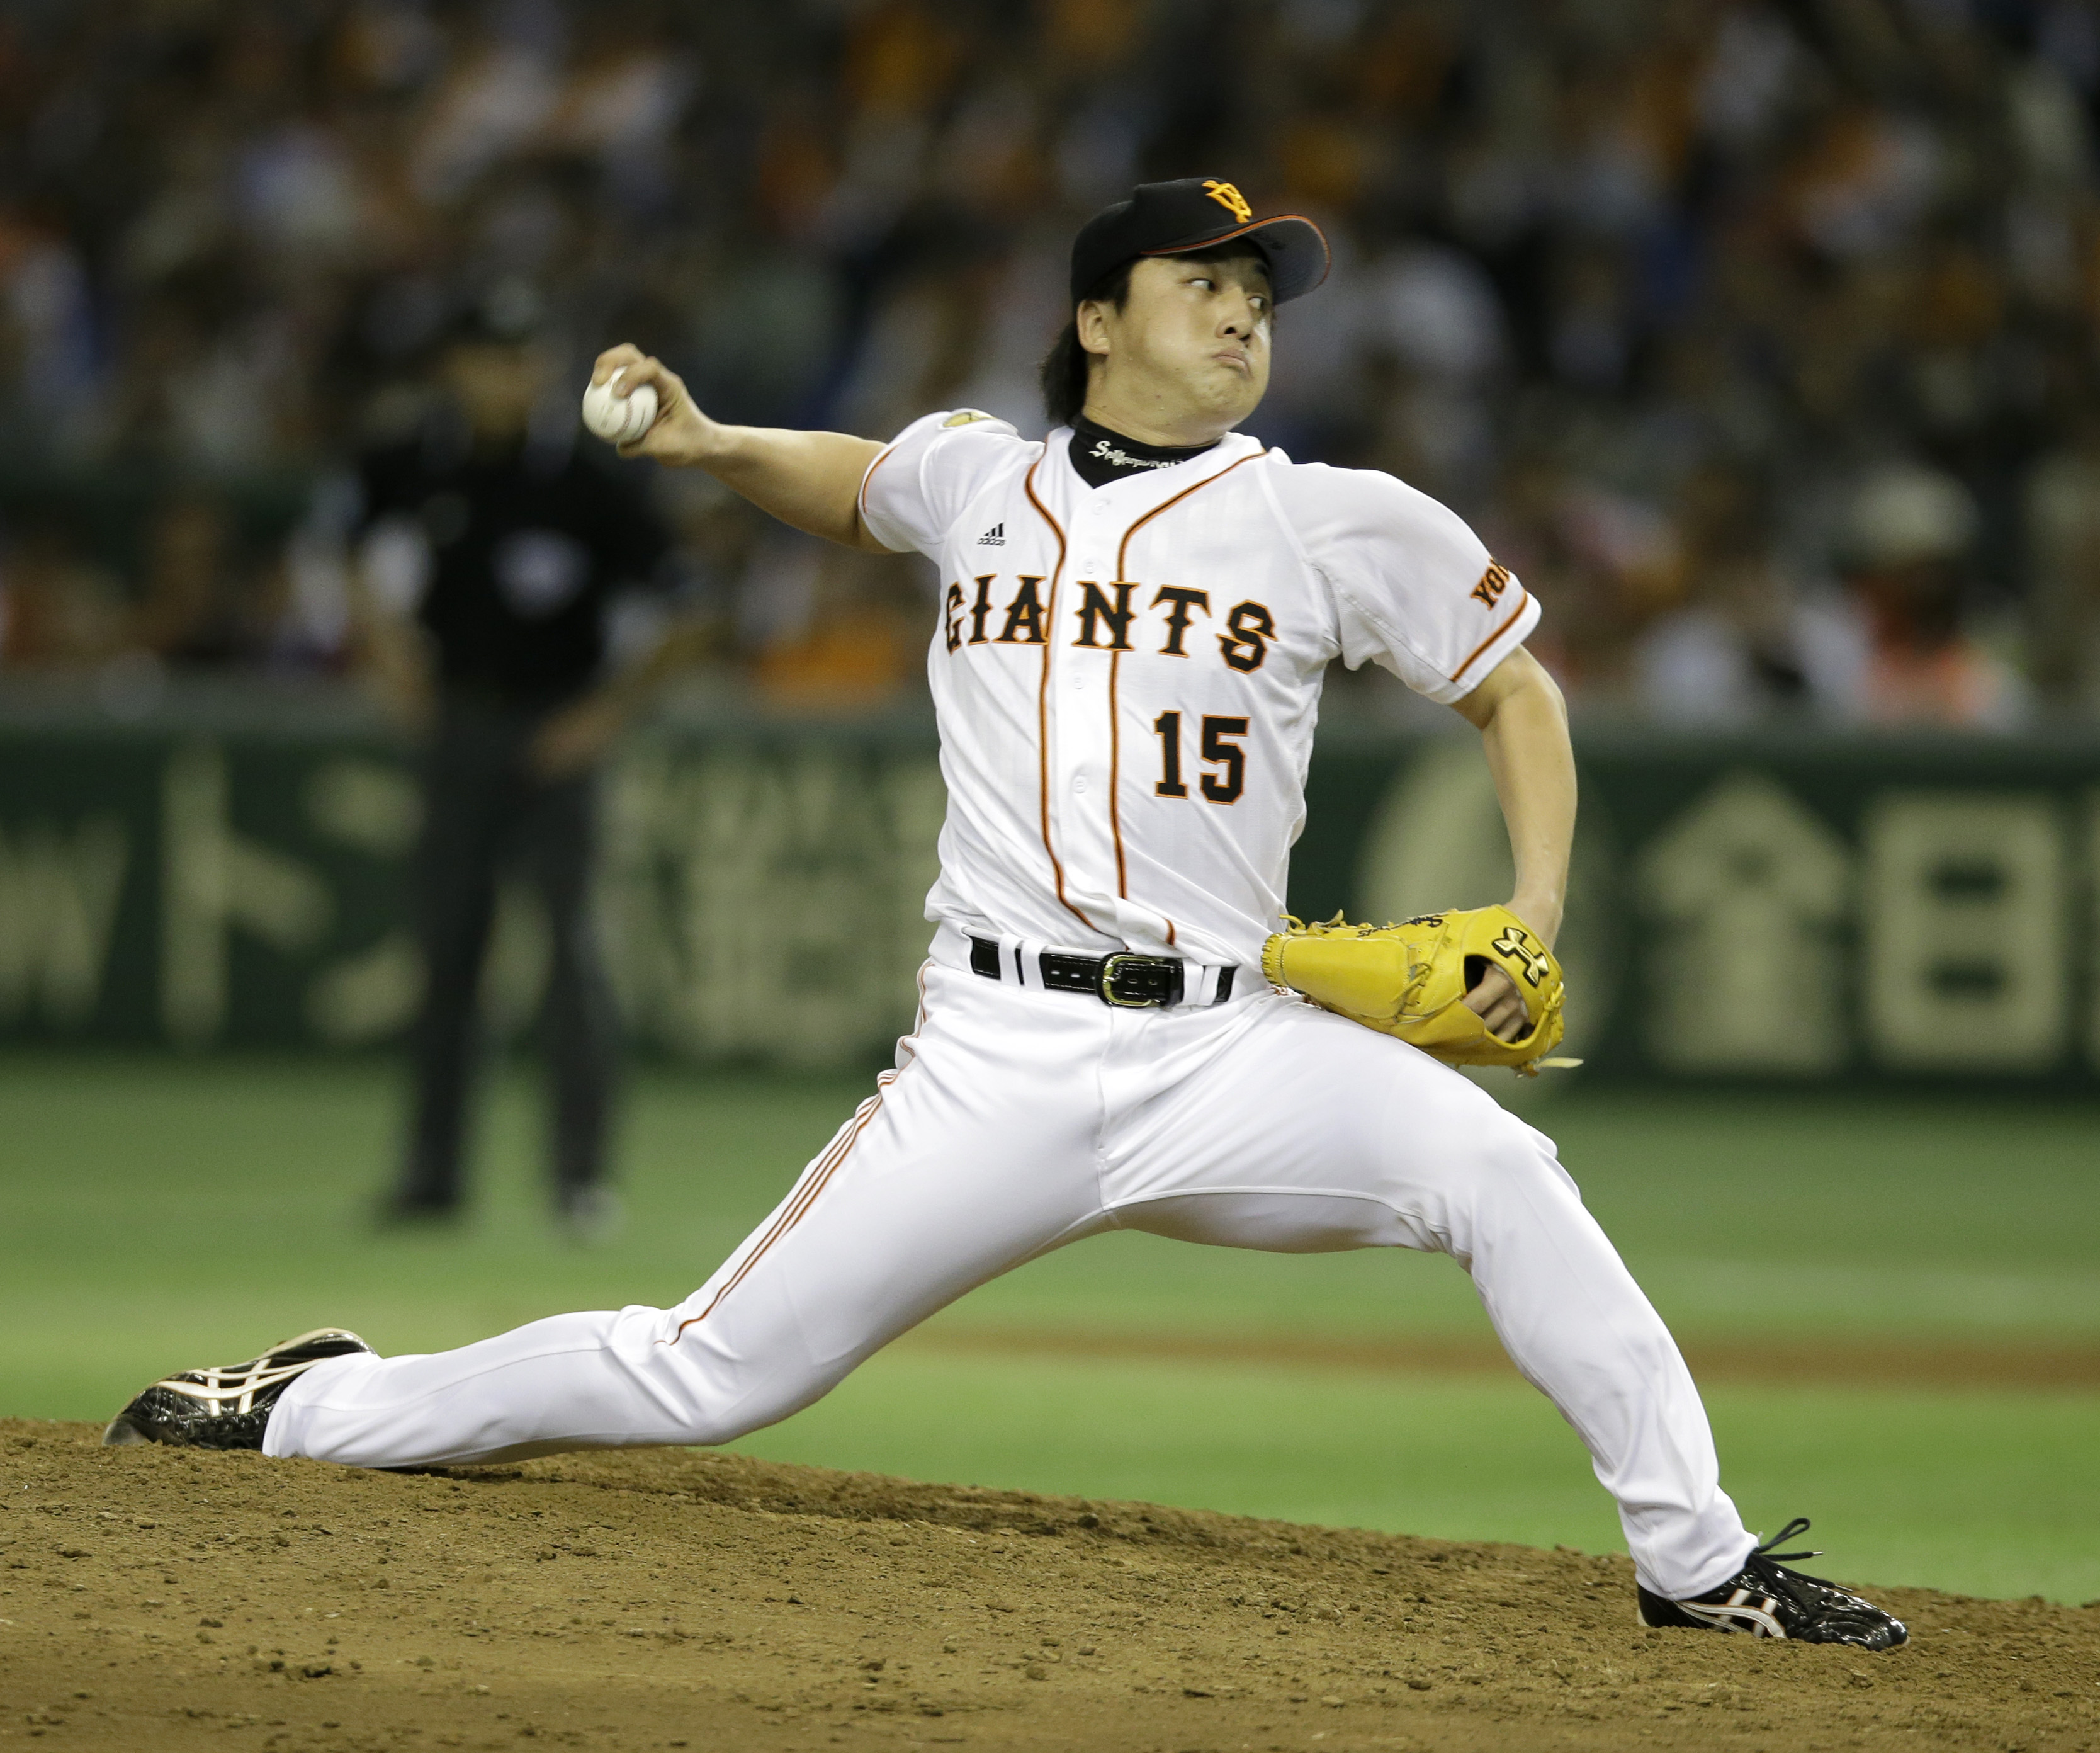 Boston Red Sox reliever Hirokazu Sawamura used Sandstorm as entrance song in Japan after watching Koji Uehara pitch in 2013 World Series